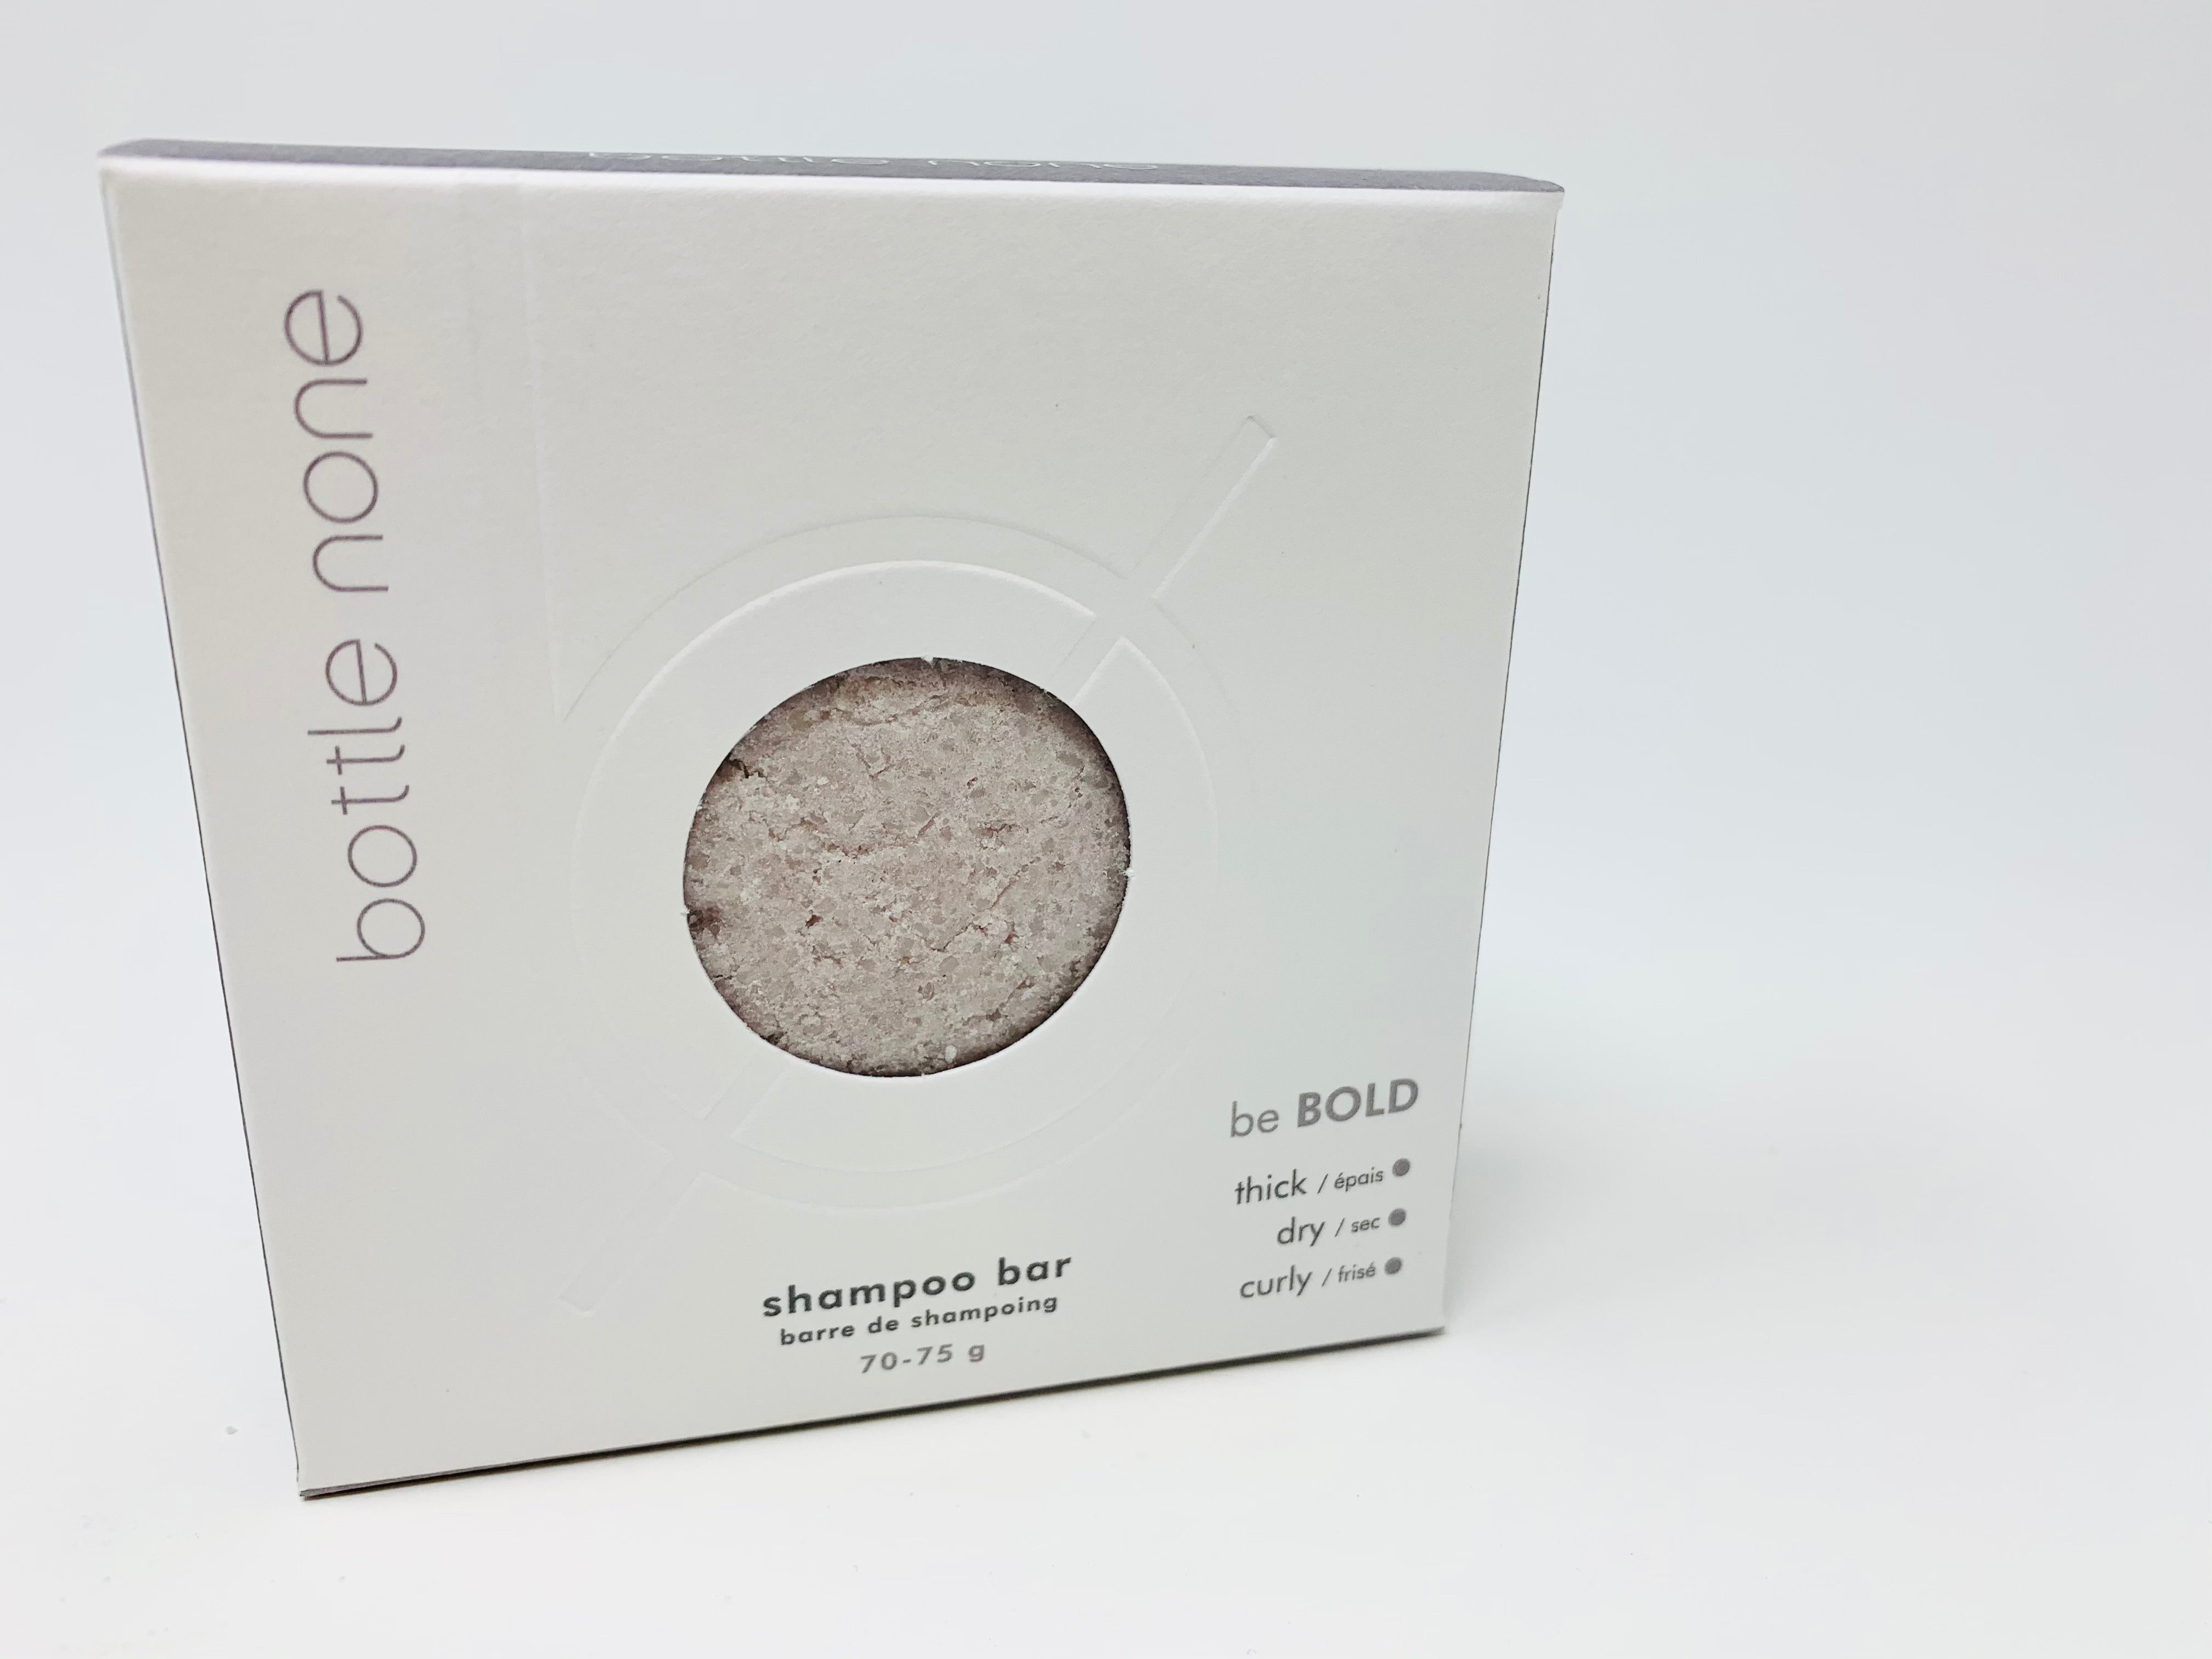 be BOLD Shampoo Bar 70-75g be BOLD - nelsonnaturals remineralizing toothpaste